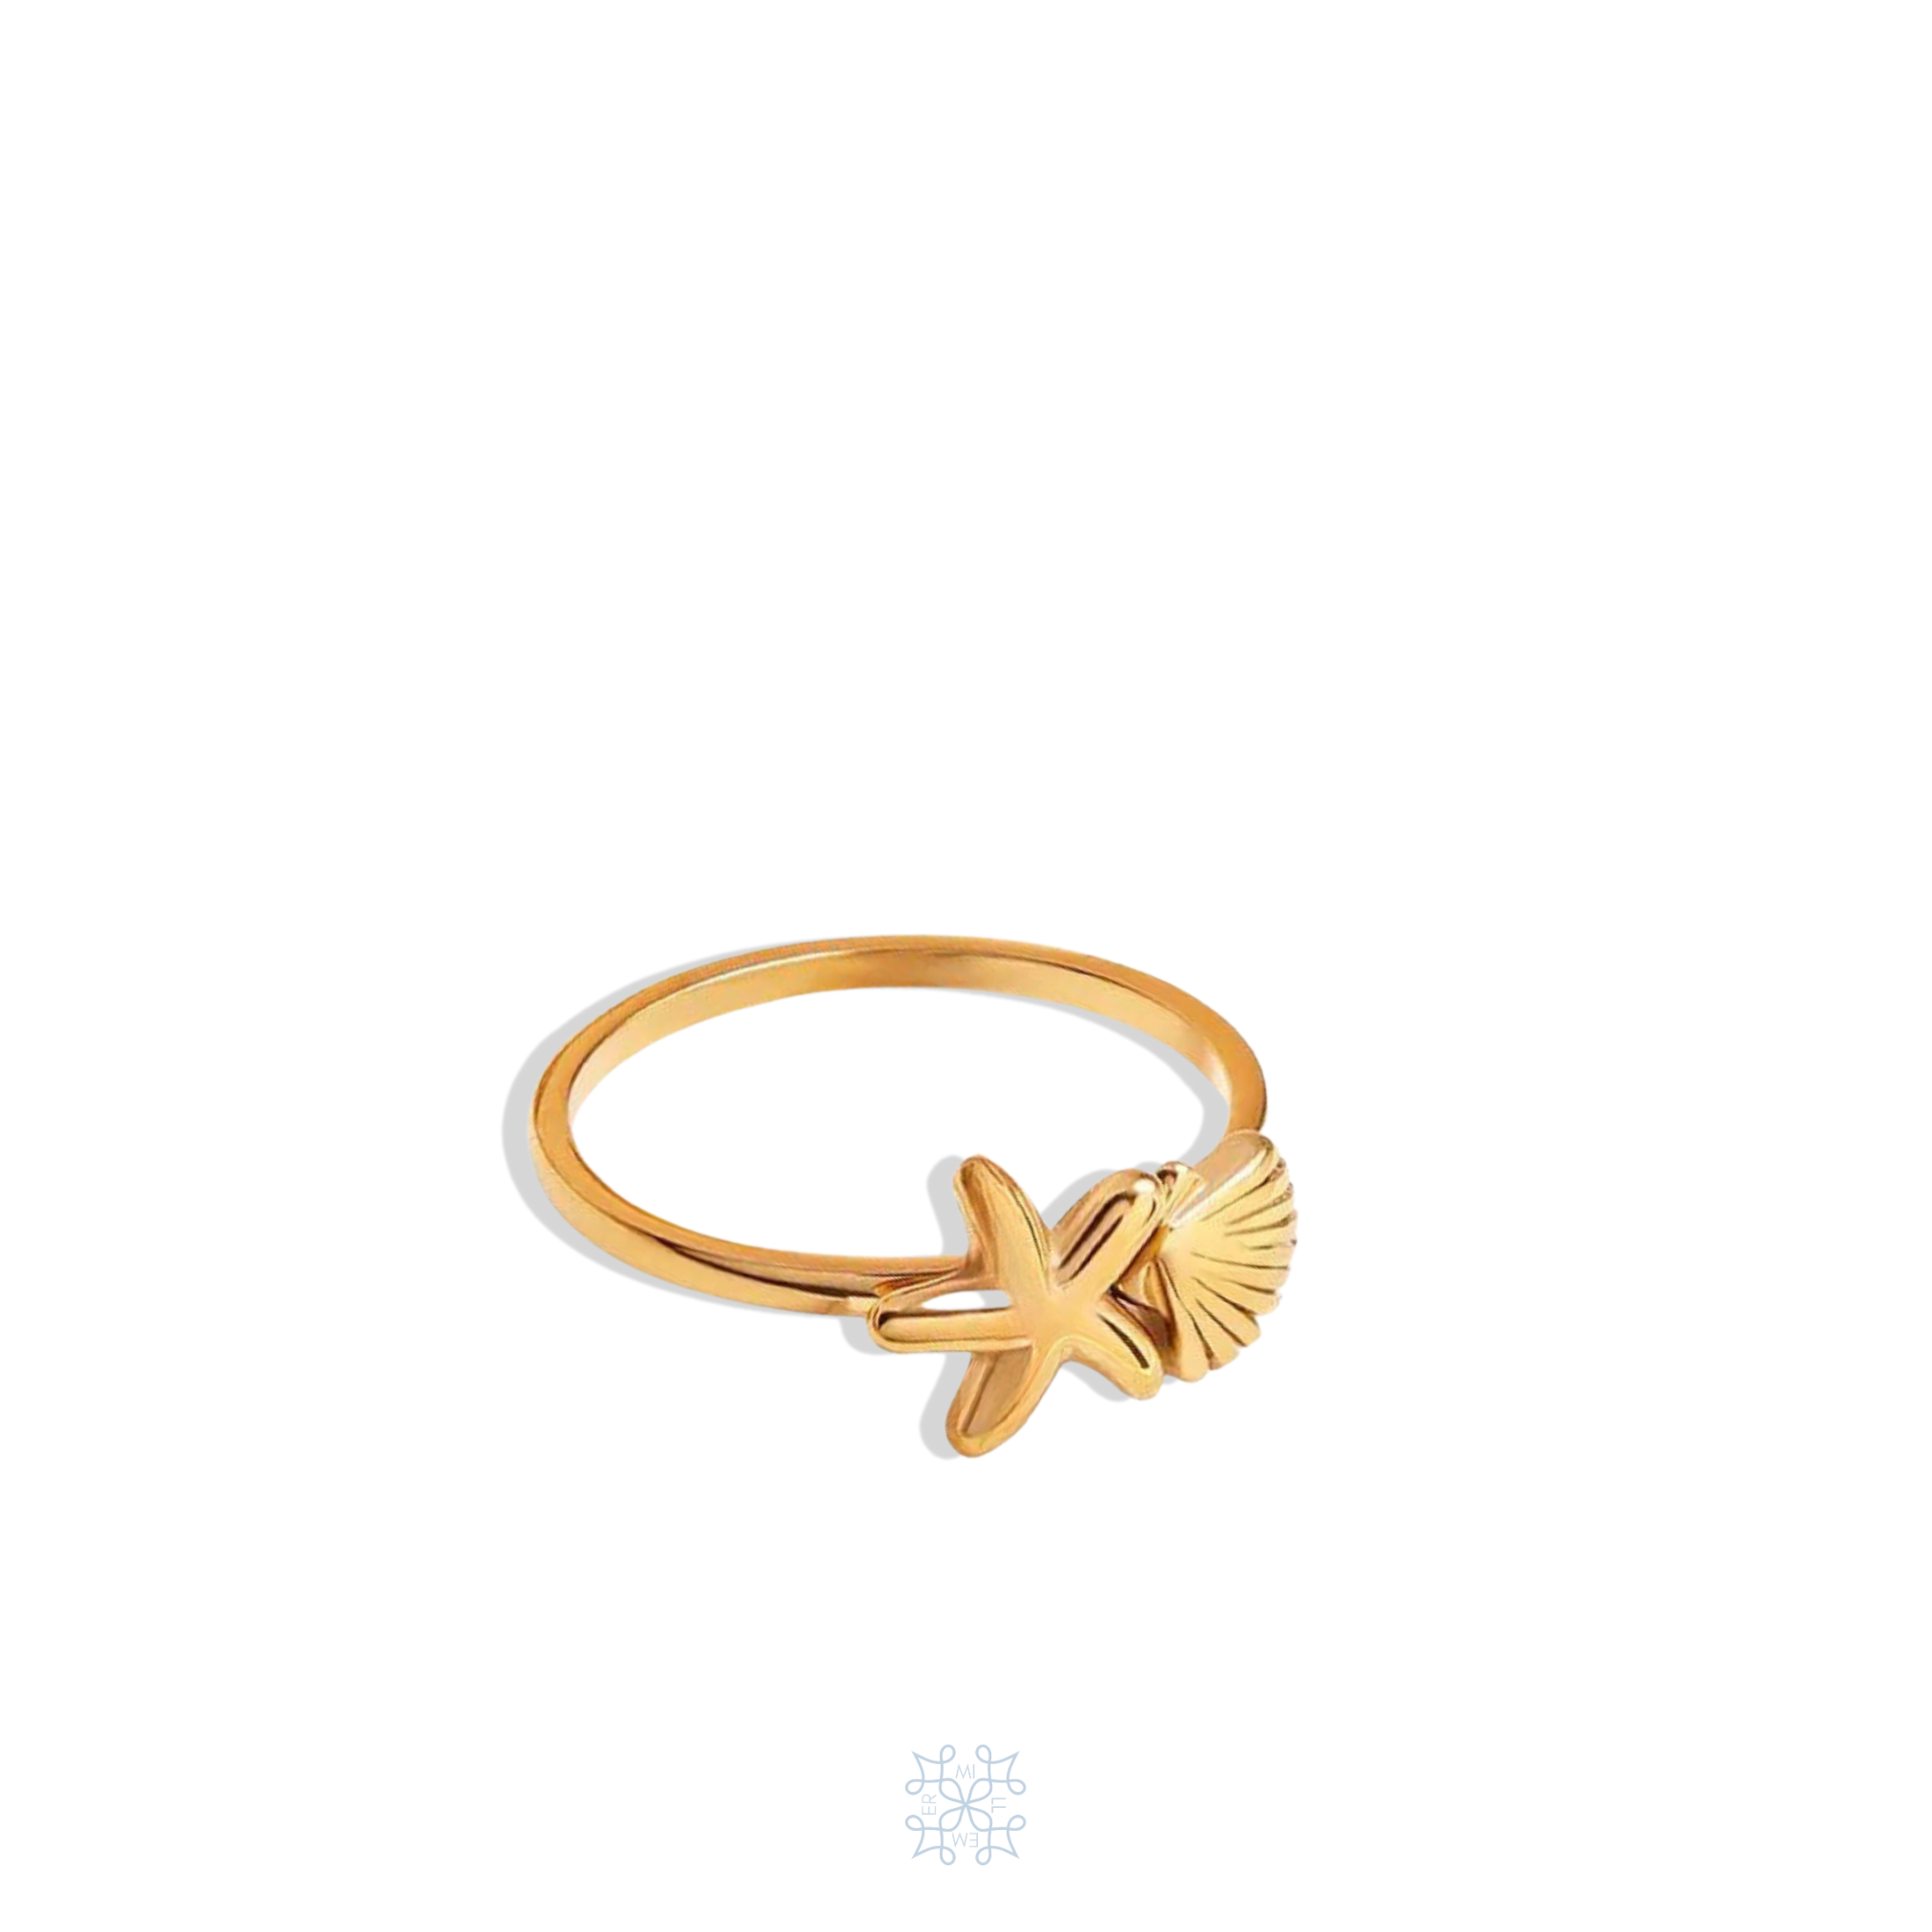 Gold plated ring. A star and a shell on the top of the halo ring. Elegant ring. Caribbean star shell gold ring.